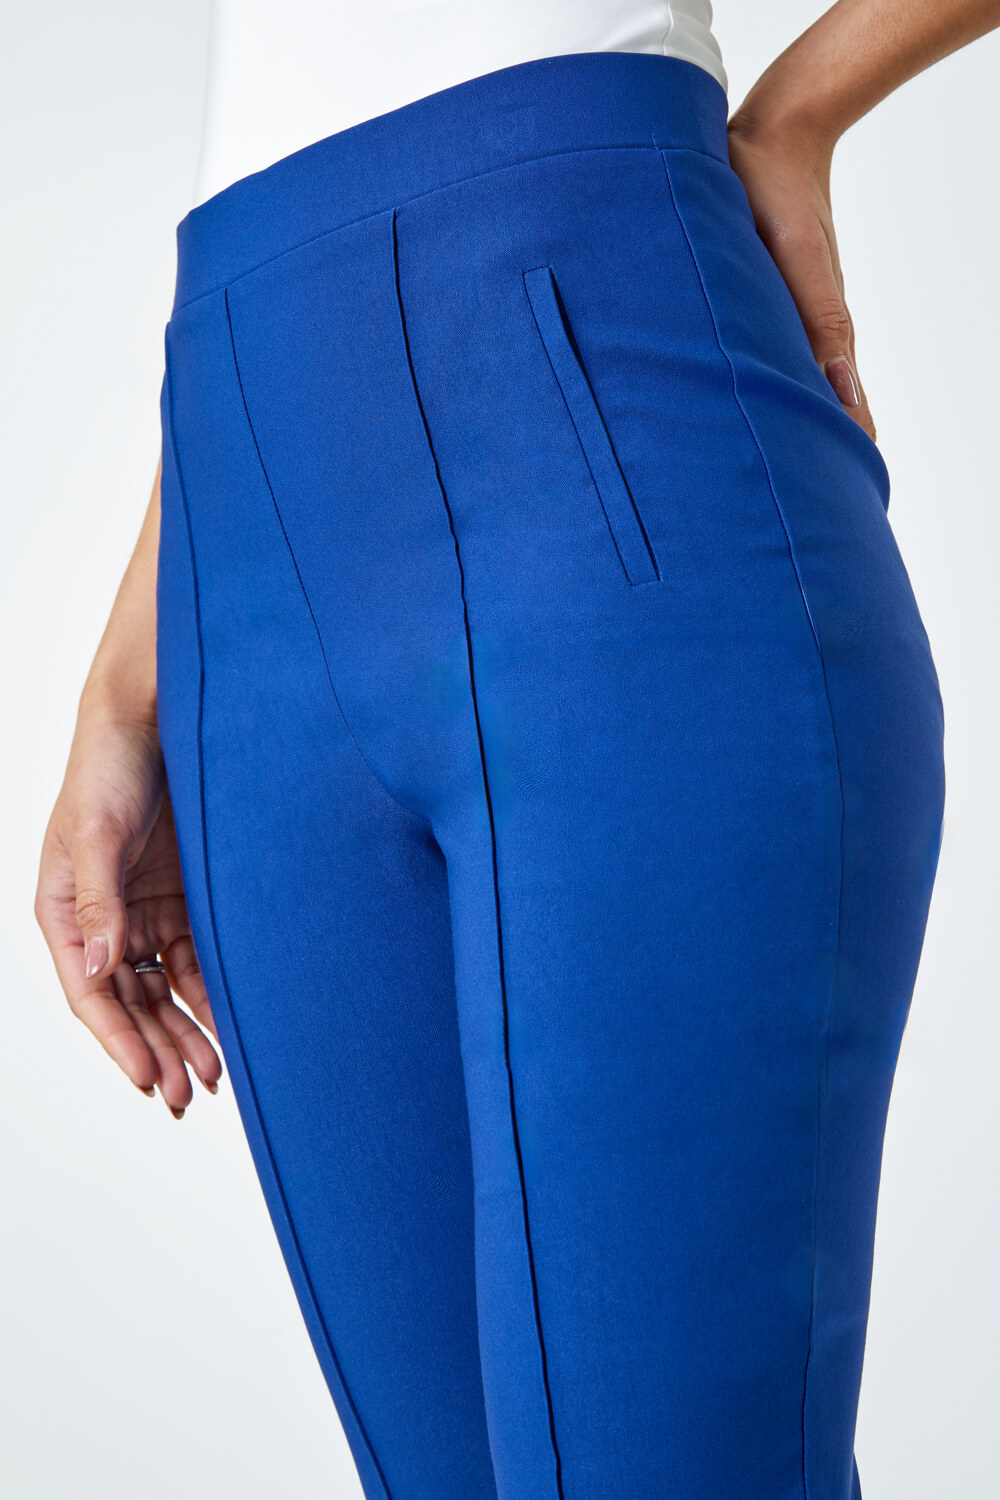 Midnight Blue Seam Detail Stretch Cropped Trousers, Image 5 of 5